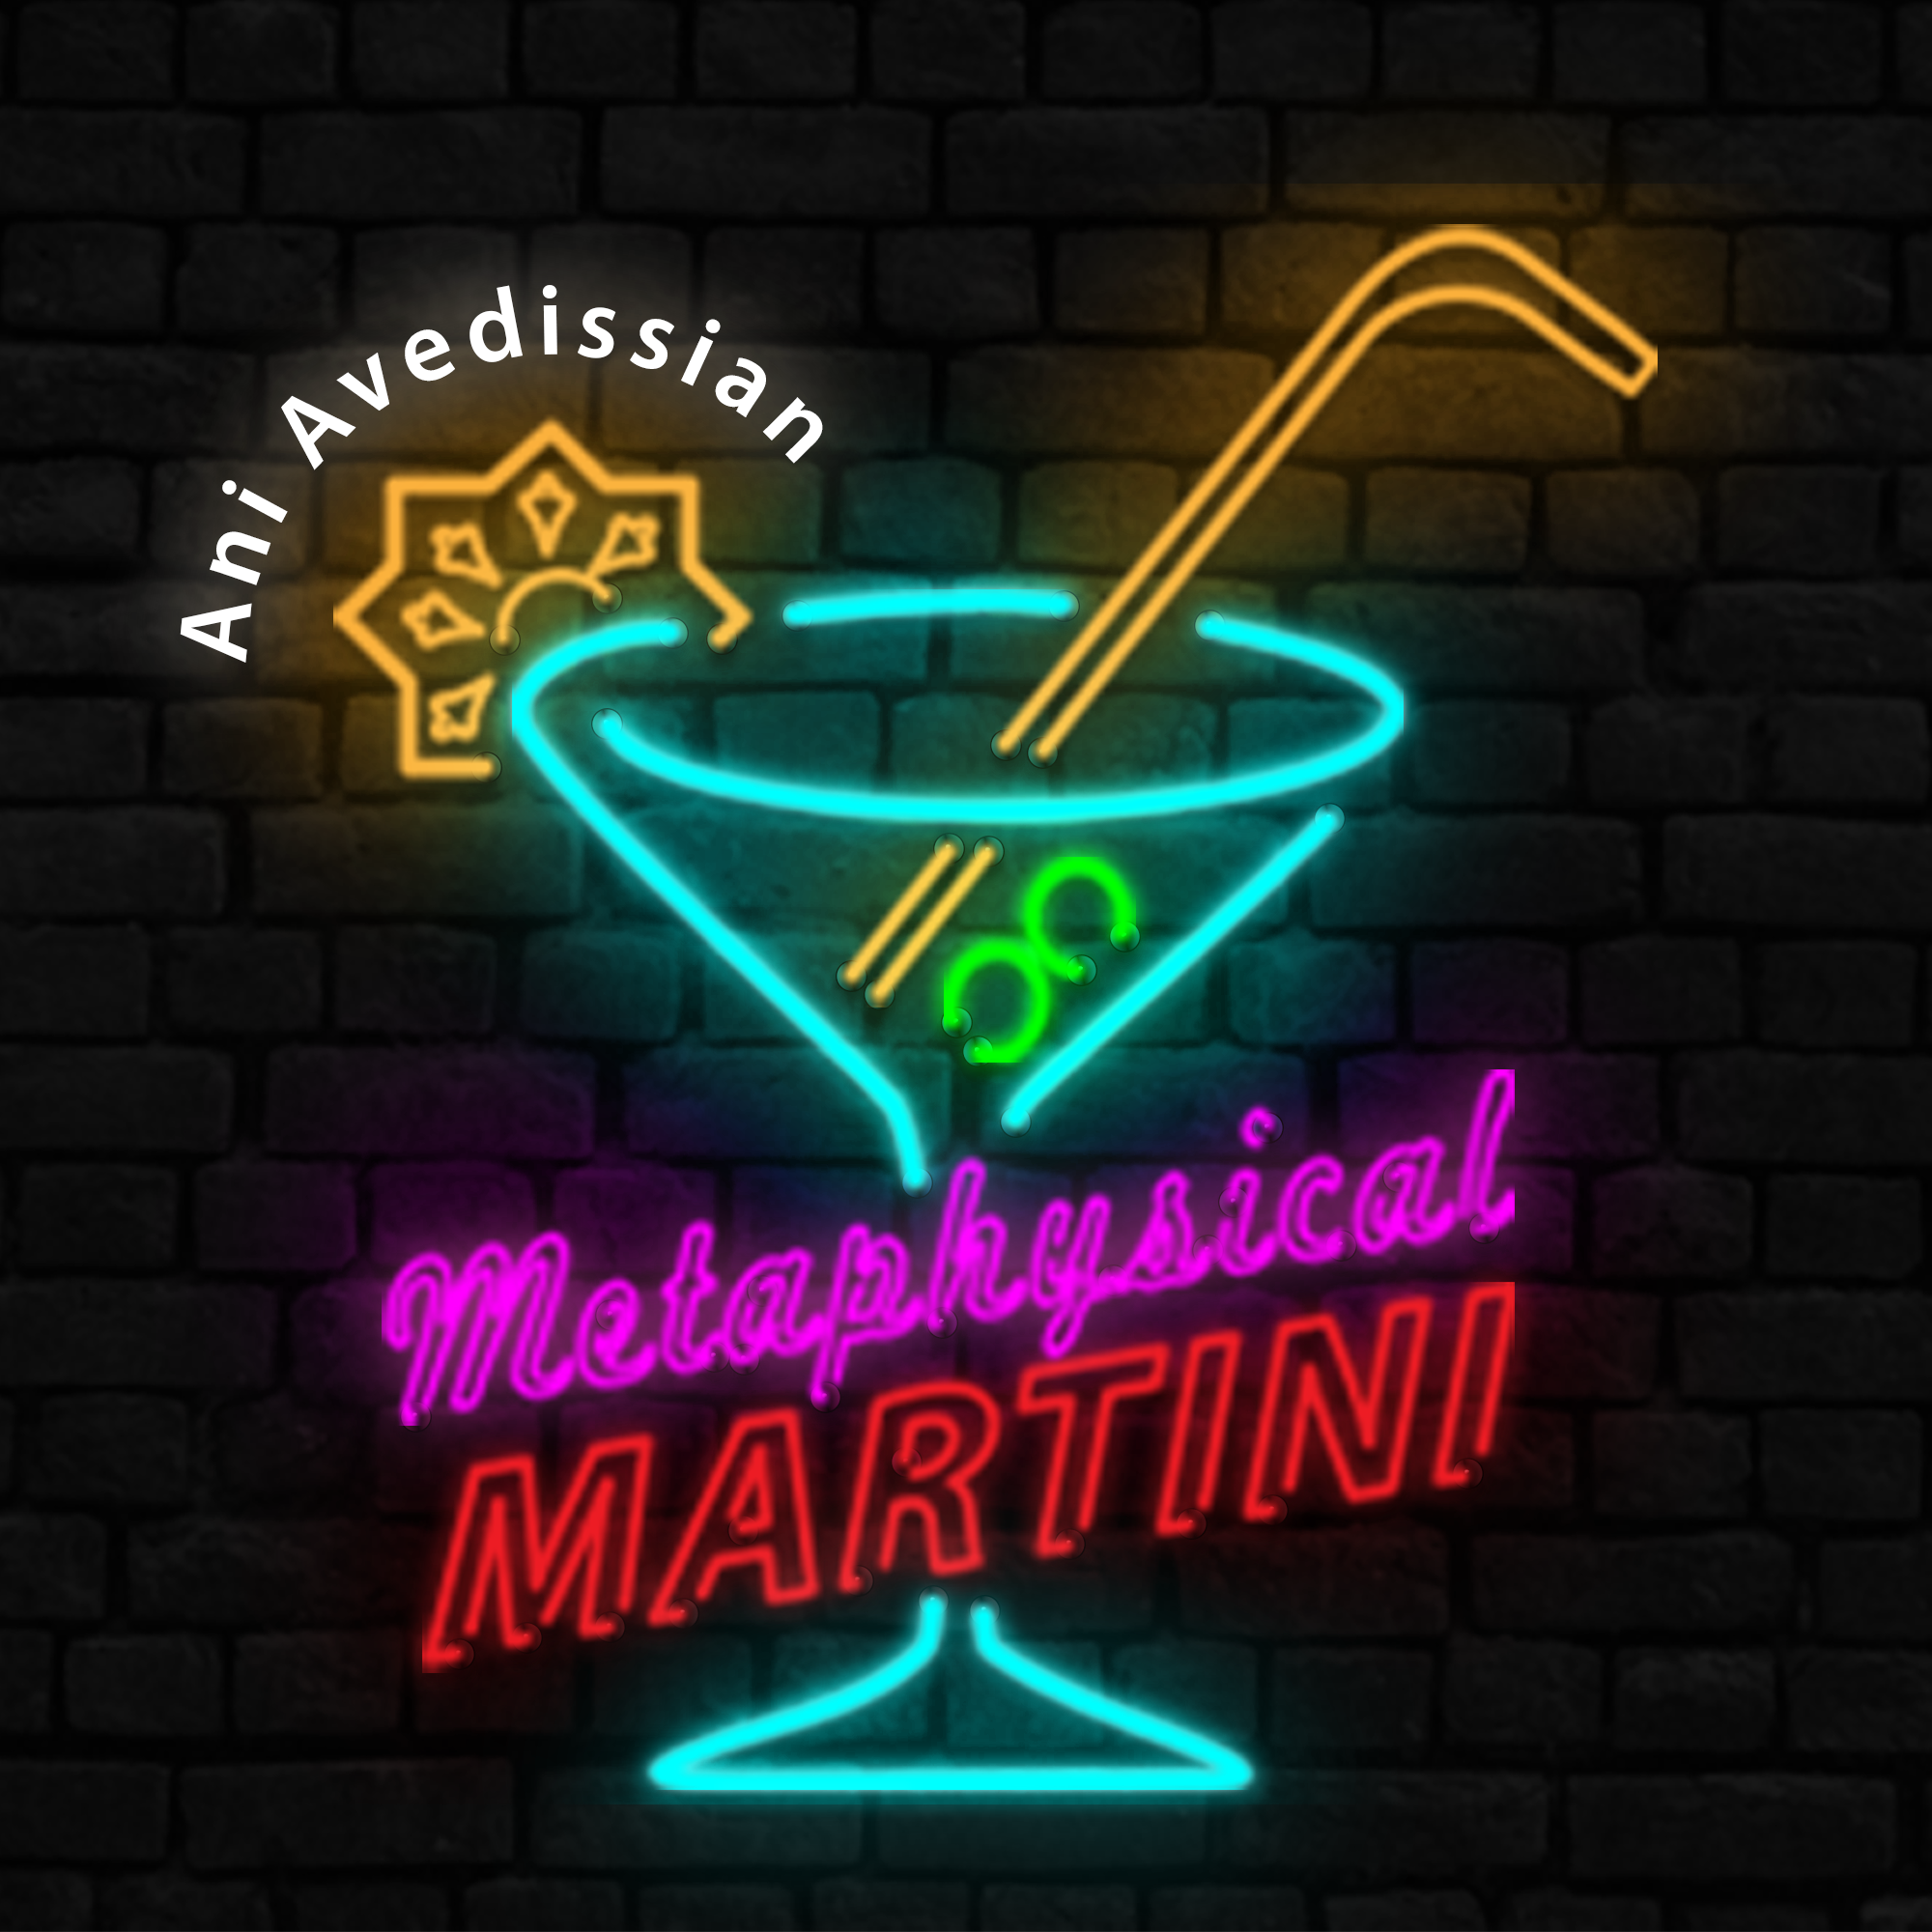 "Metaphysical Martini" 02/17/2021 Metaphysical Mixology garnished with a twist of humor!